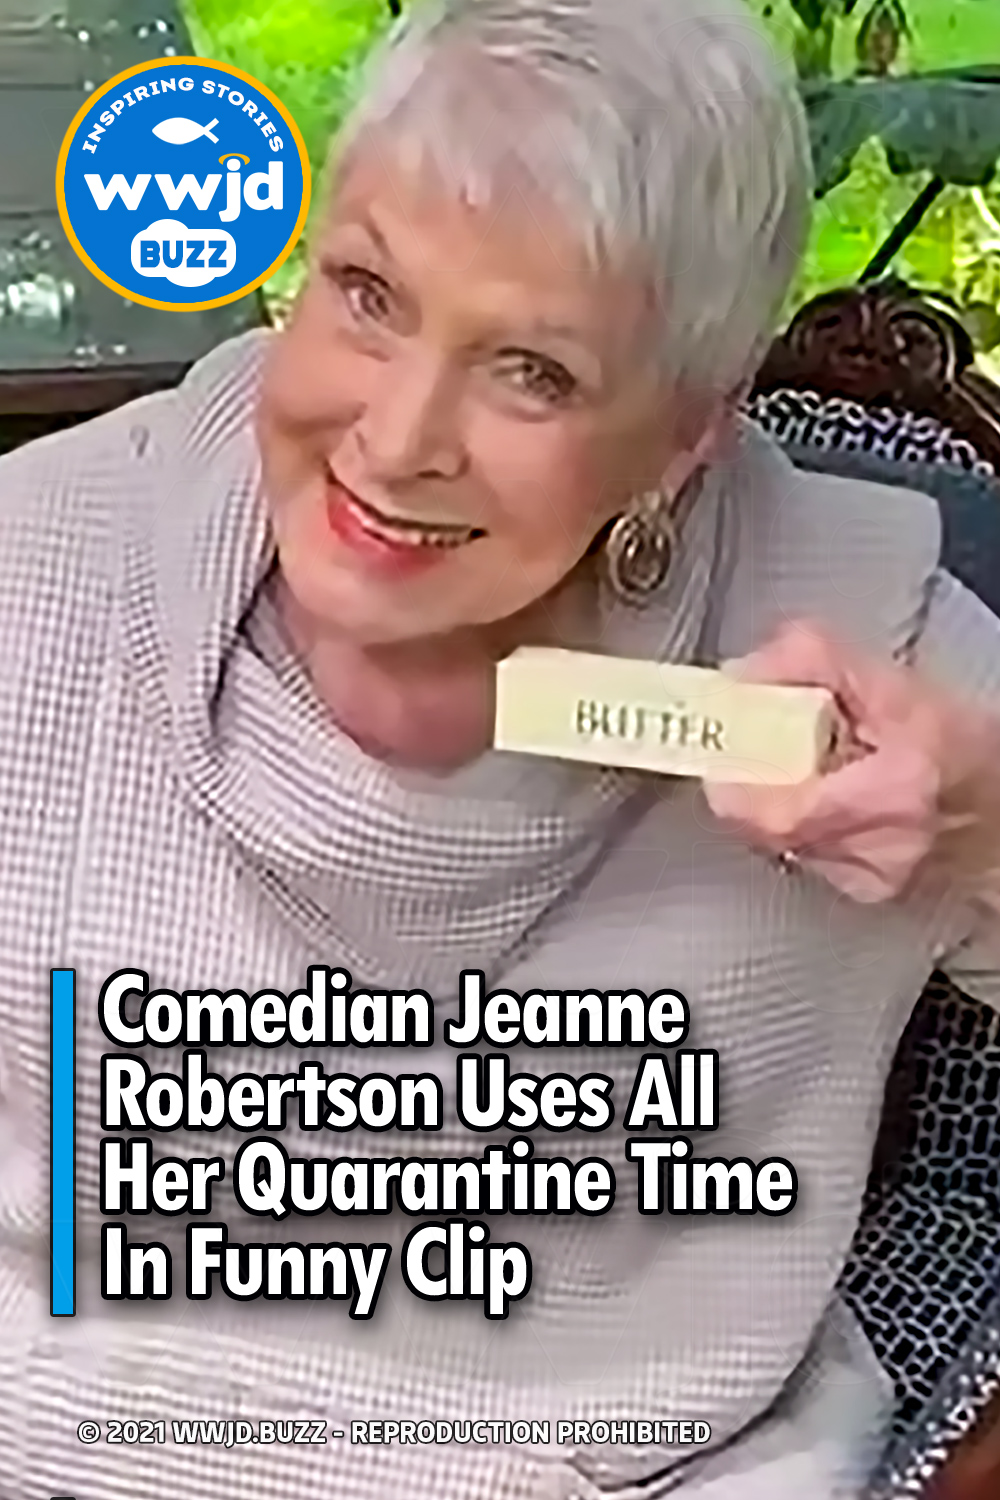 Comedian Jeanne Robertson Uses All Her Quarantine Time In Funny Clip